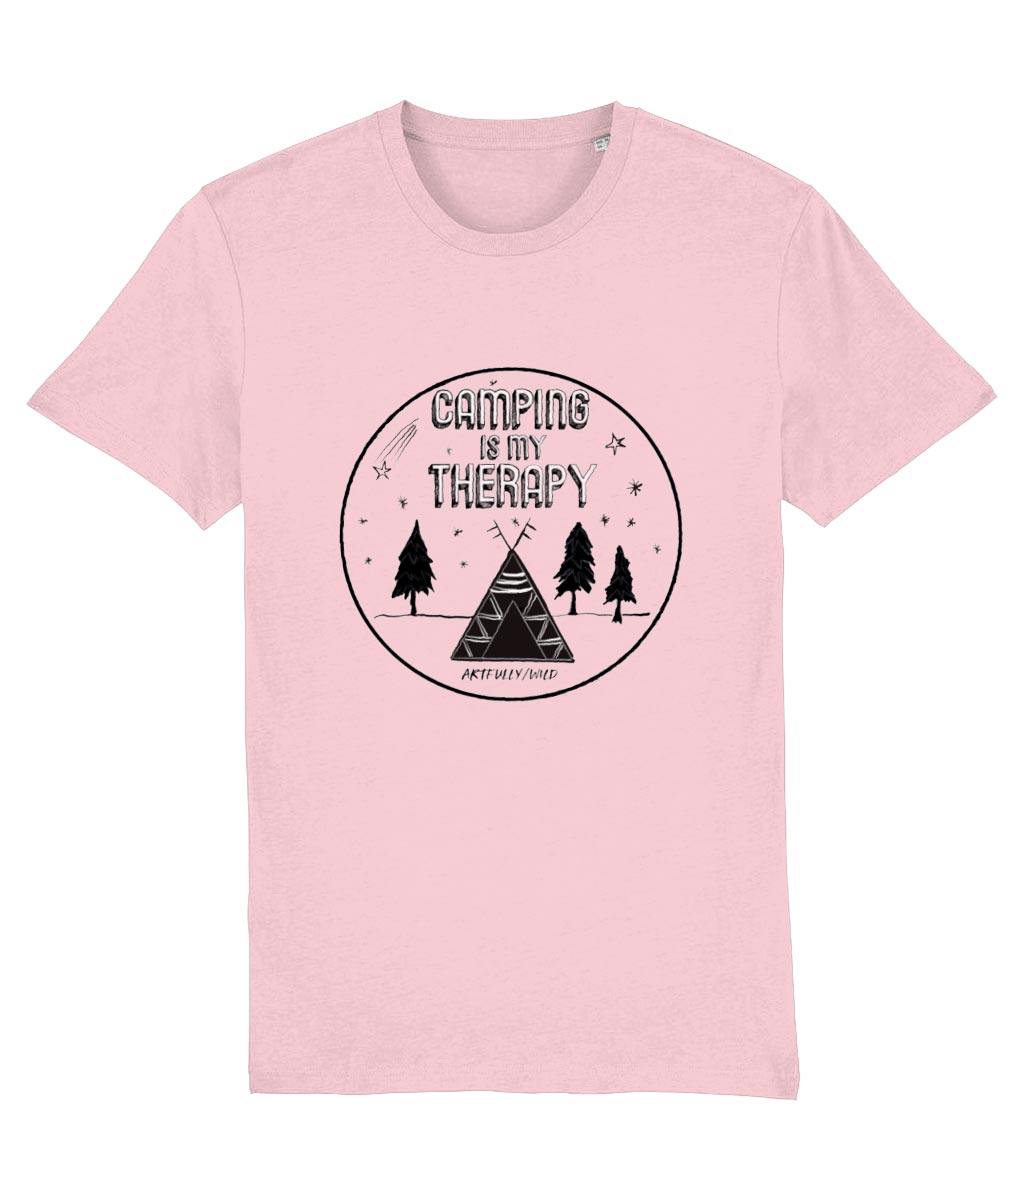 'CAMPING IS MY THERAPY' Organic Cotton Unisex Pink T-Shirt. Printed with eco-friendly water-based Inks. Original Design by Artfully Wild.